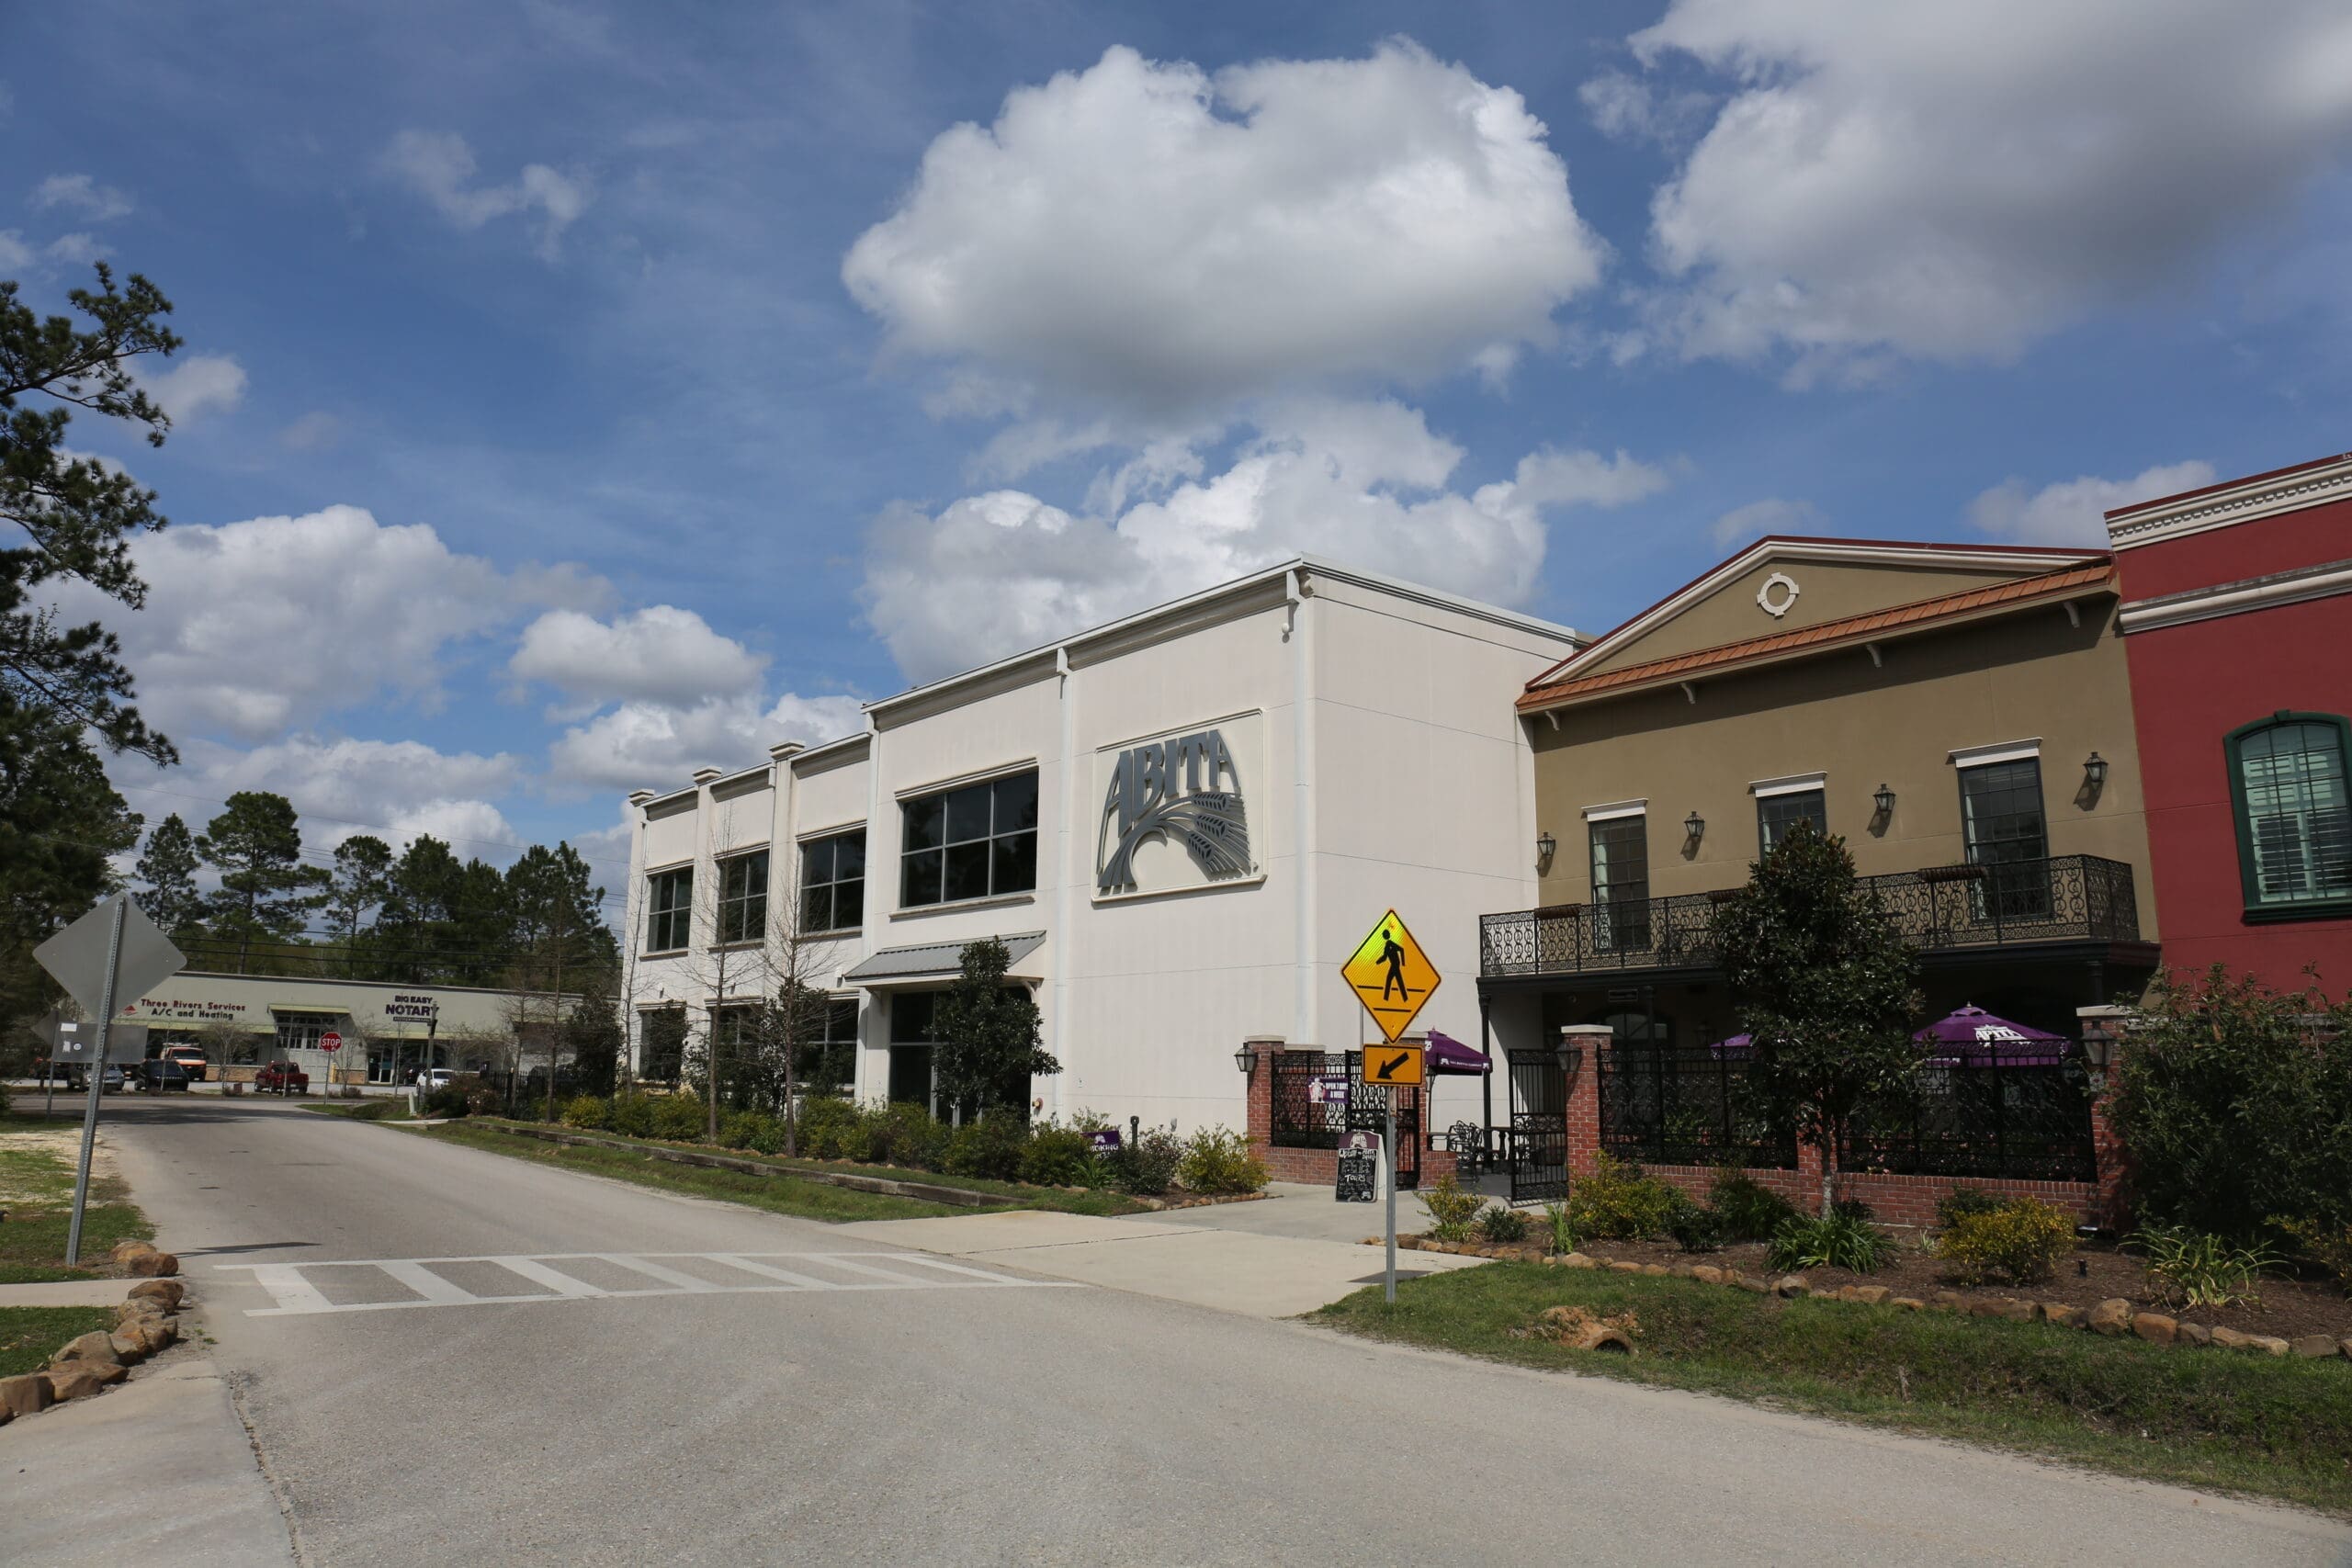 street view of the outside of the abita brewery